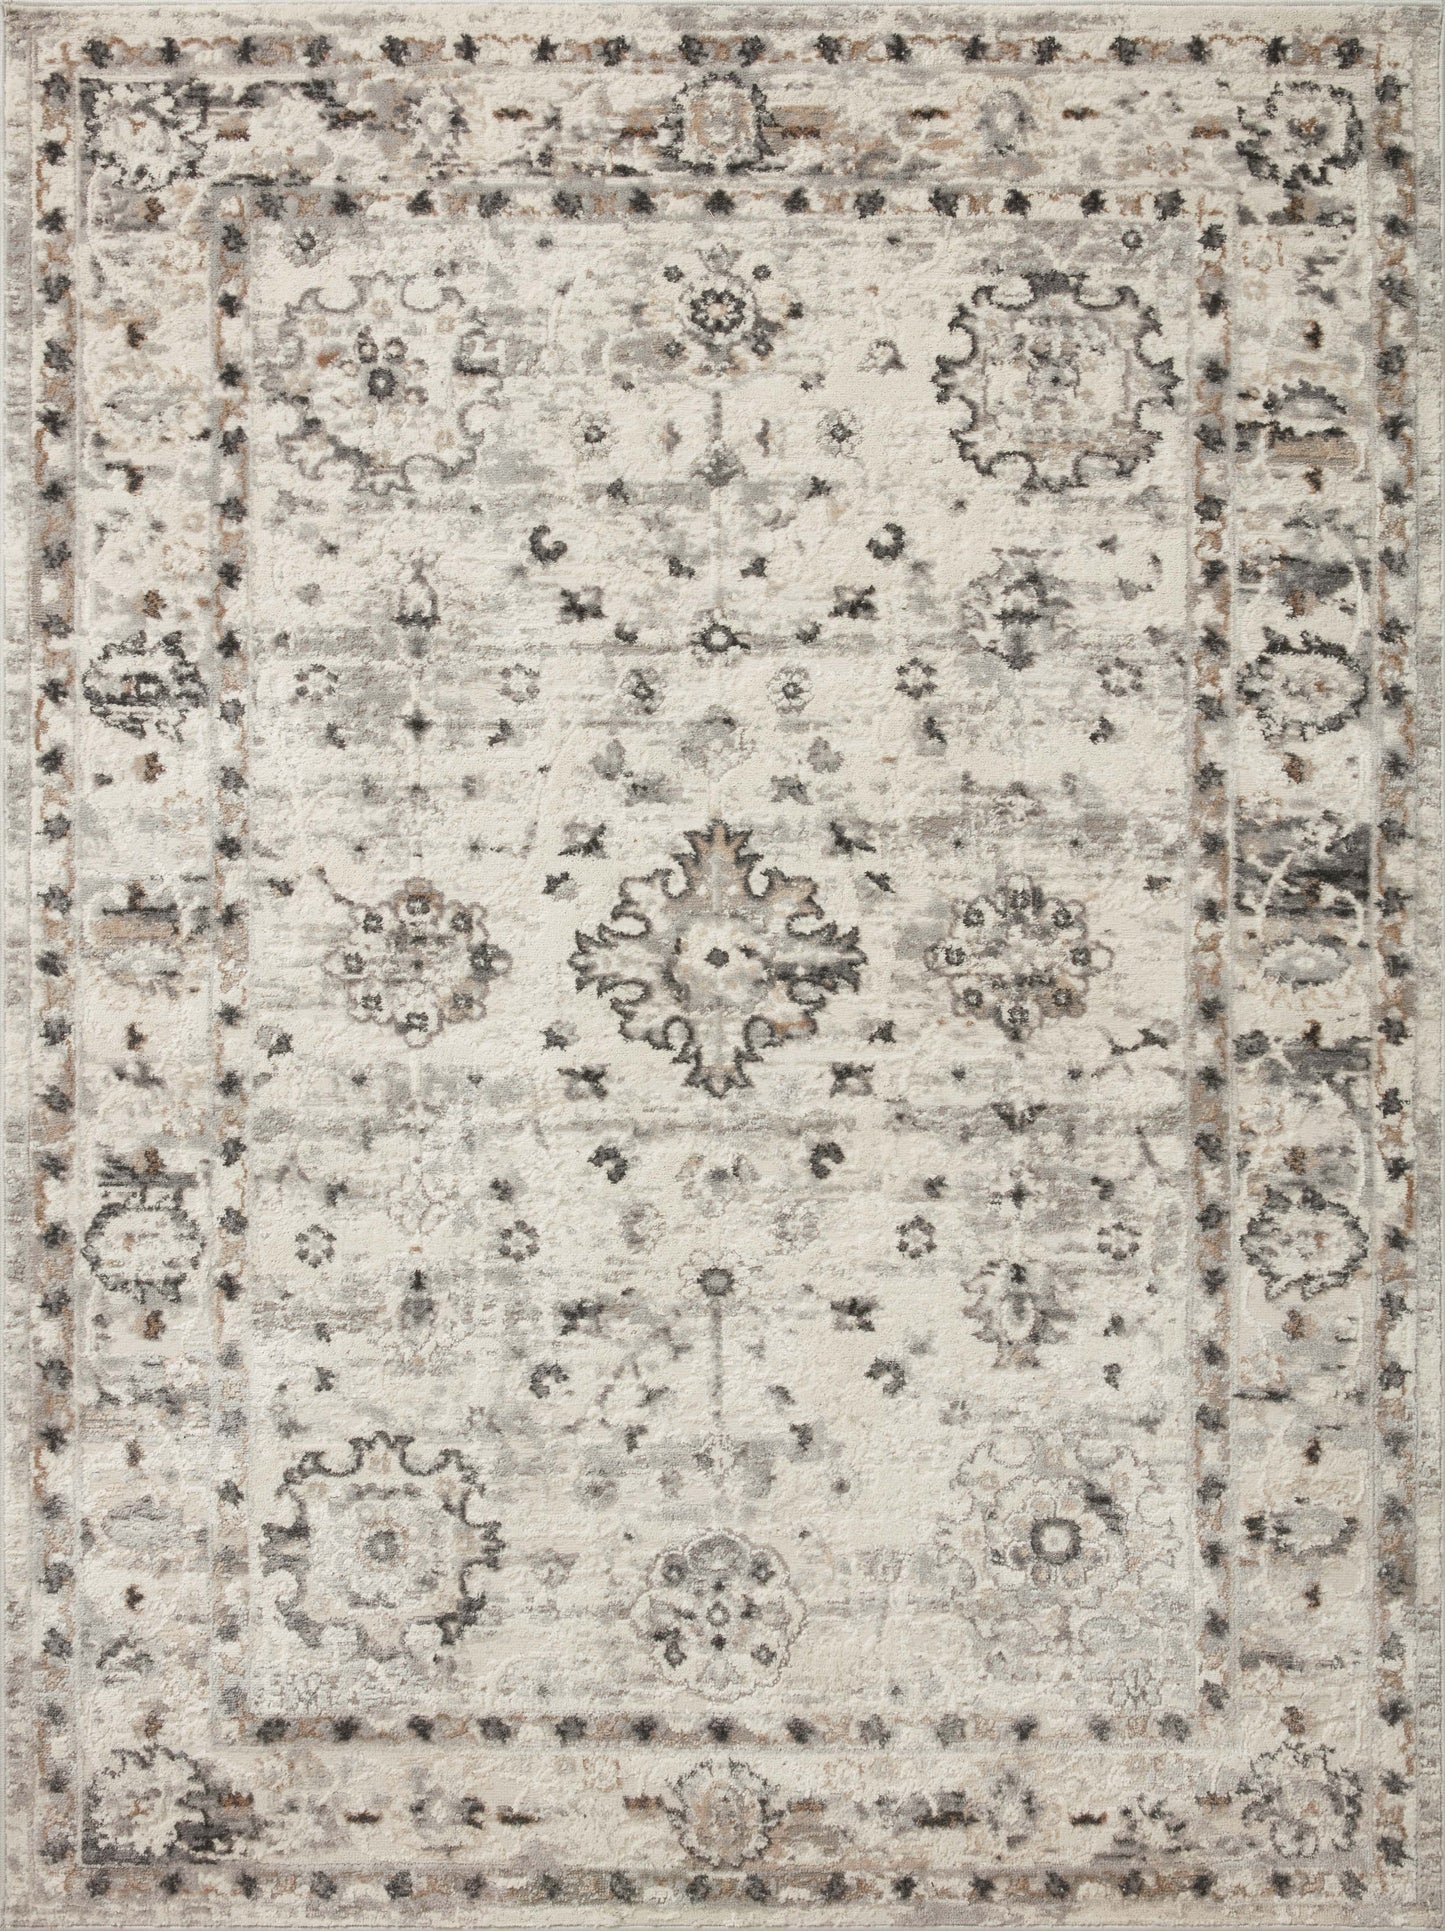 A picture of Loloi's Estelle rug, in style EST-01, color Ivory / Stone